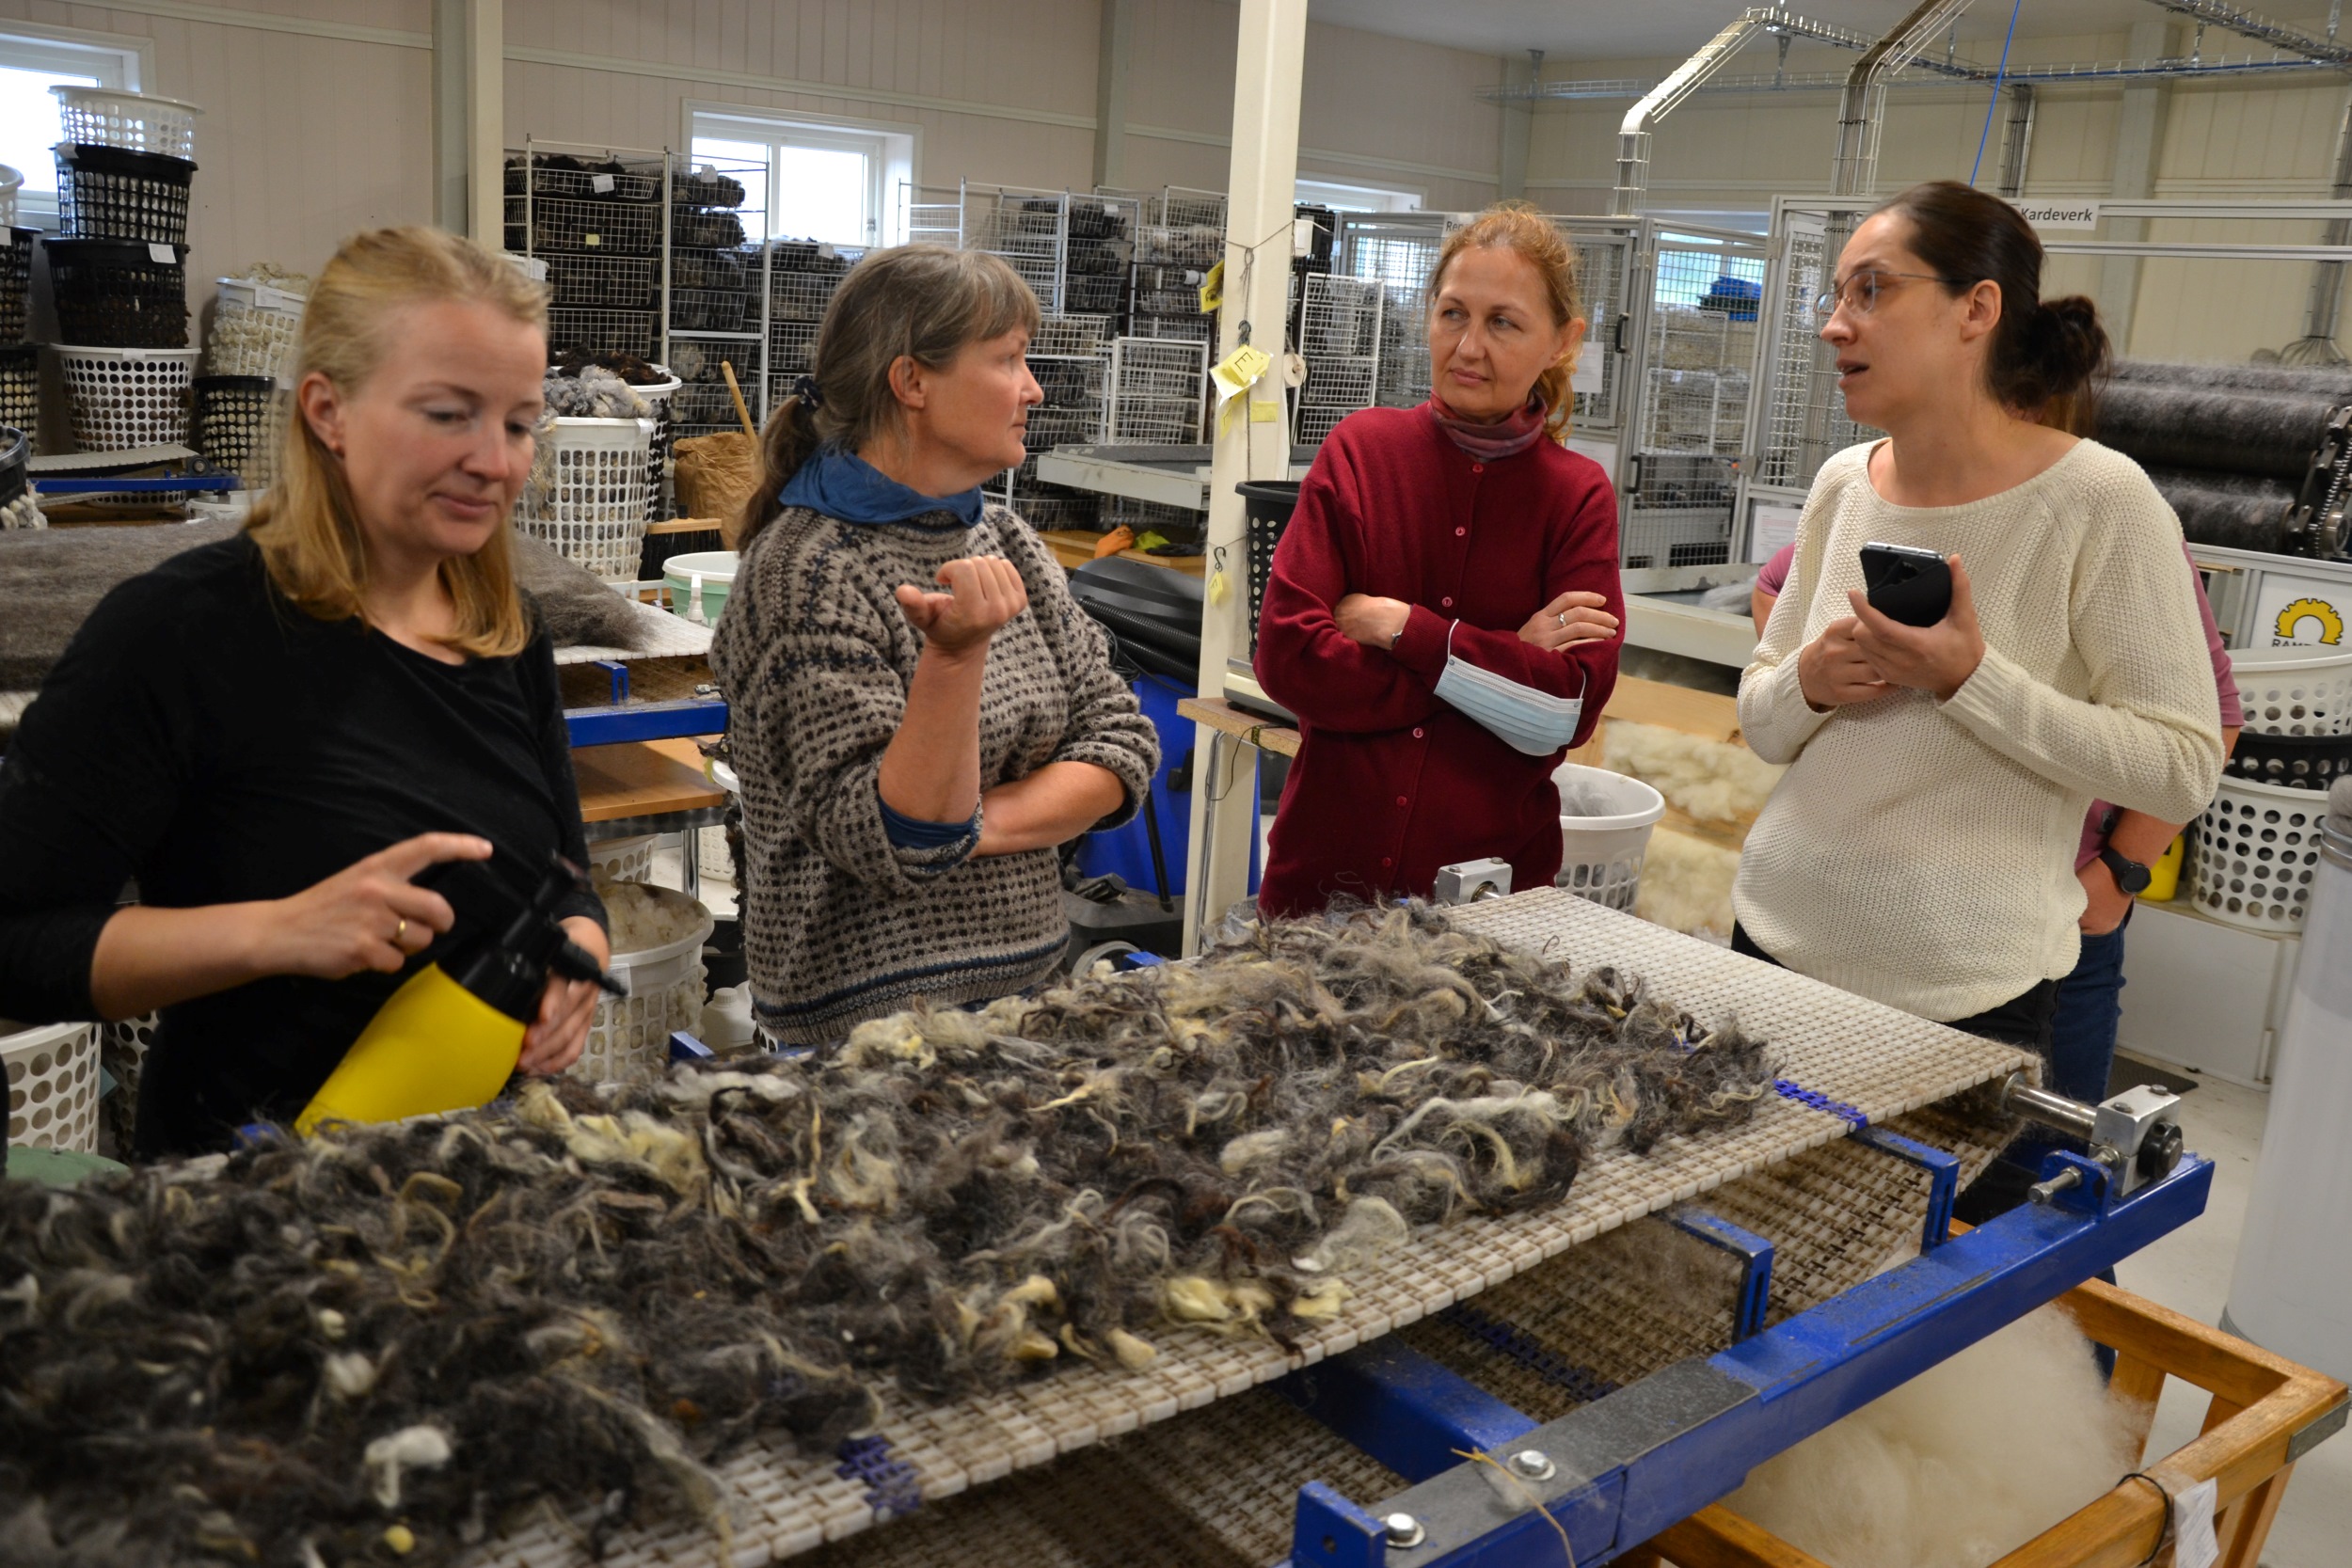 The researchers studying the Polish mountain wool.